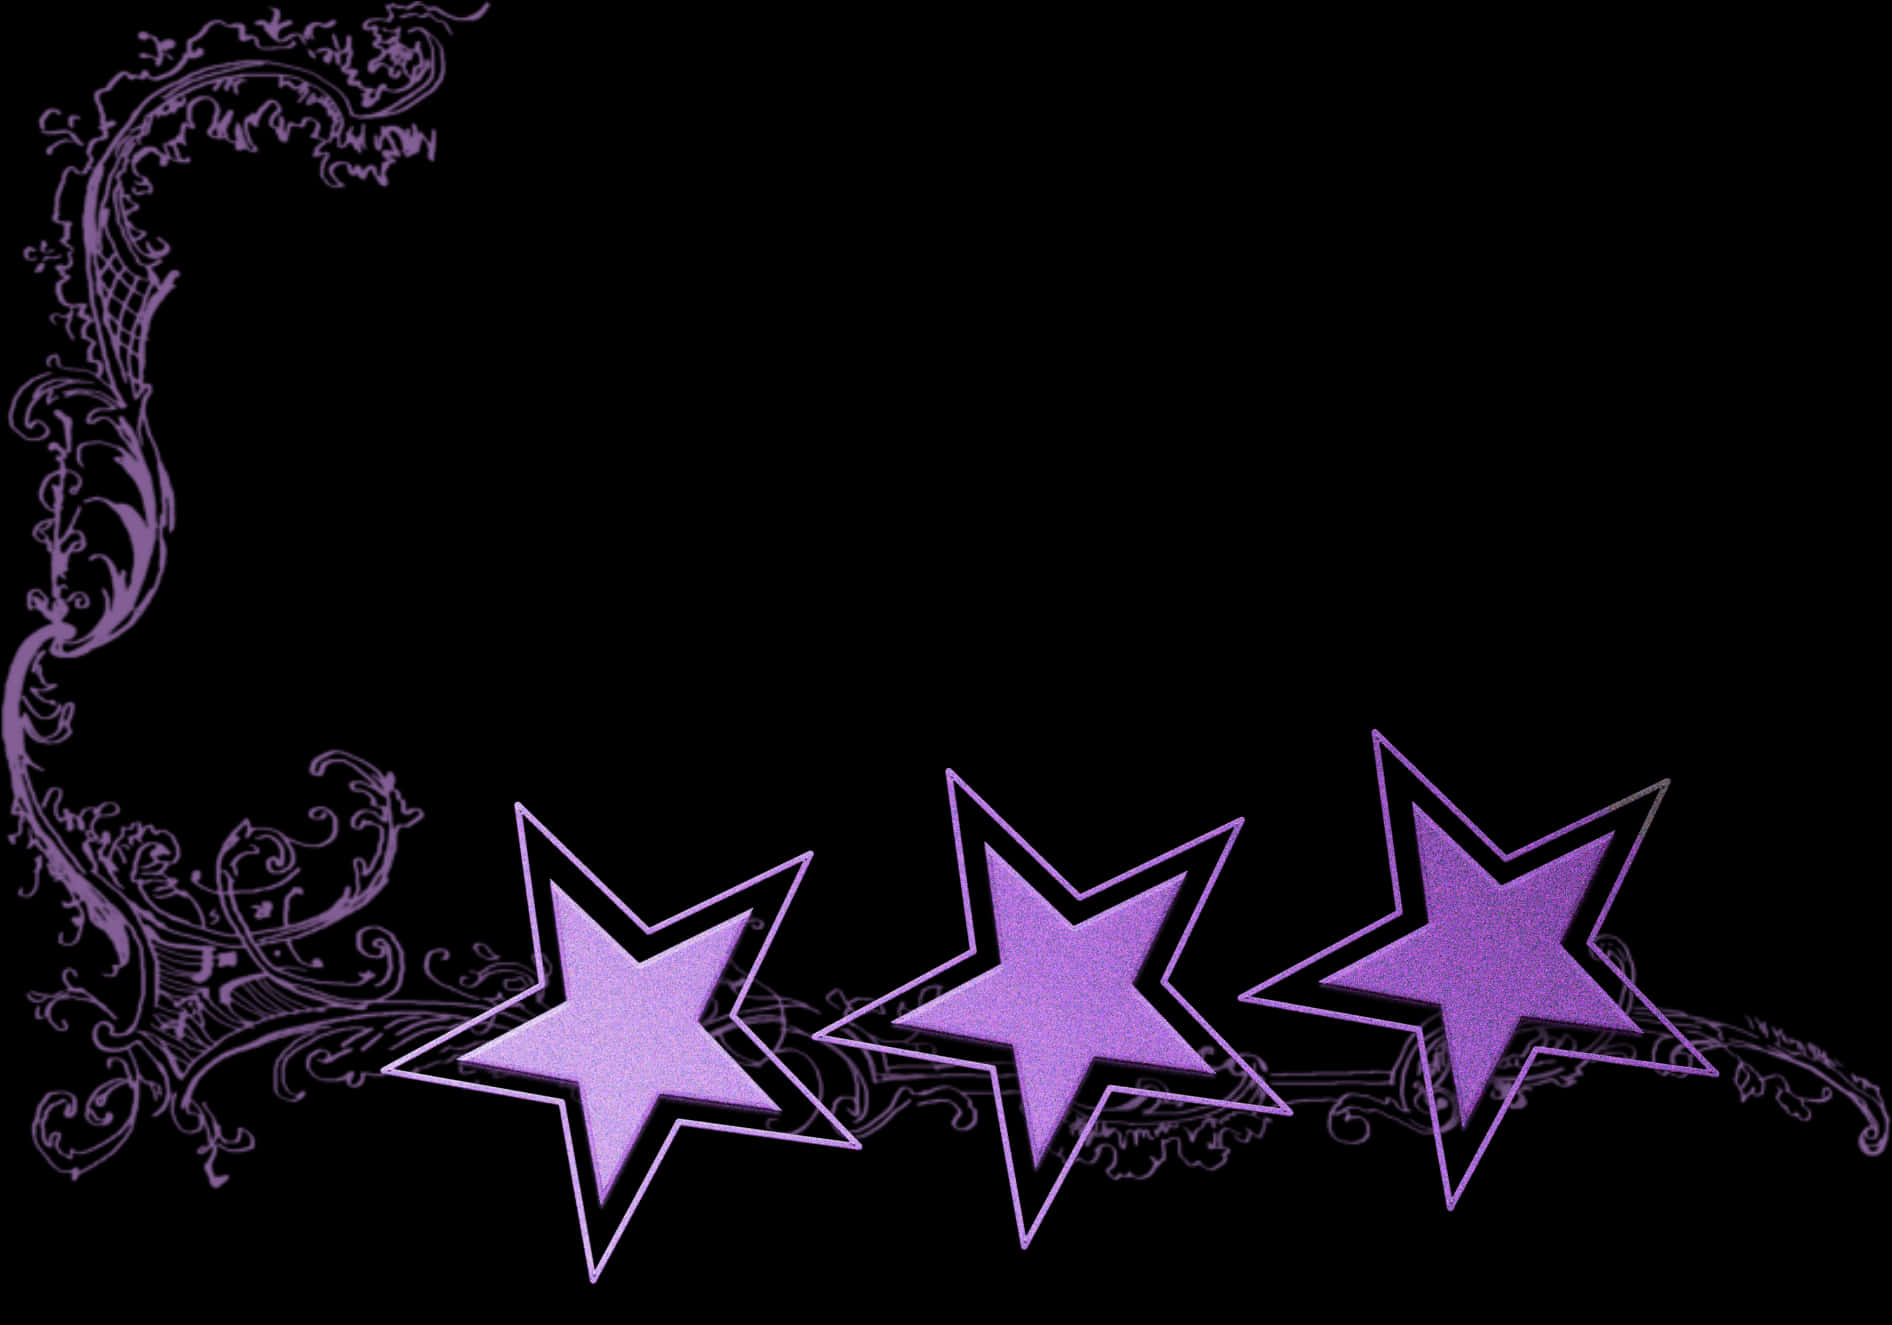 A Group Of Stars With Purple And Black Design